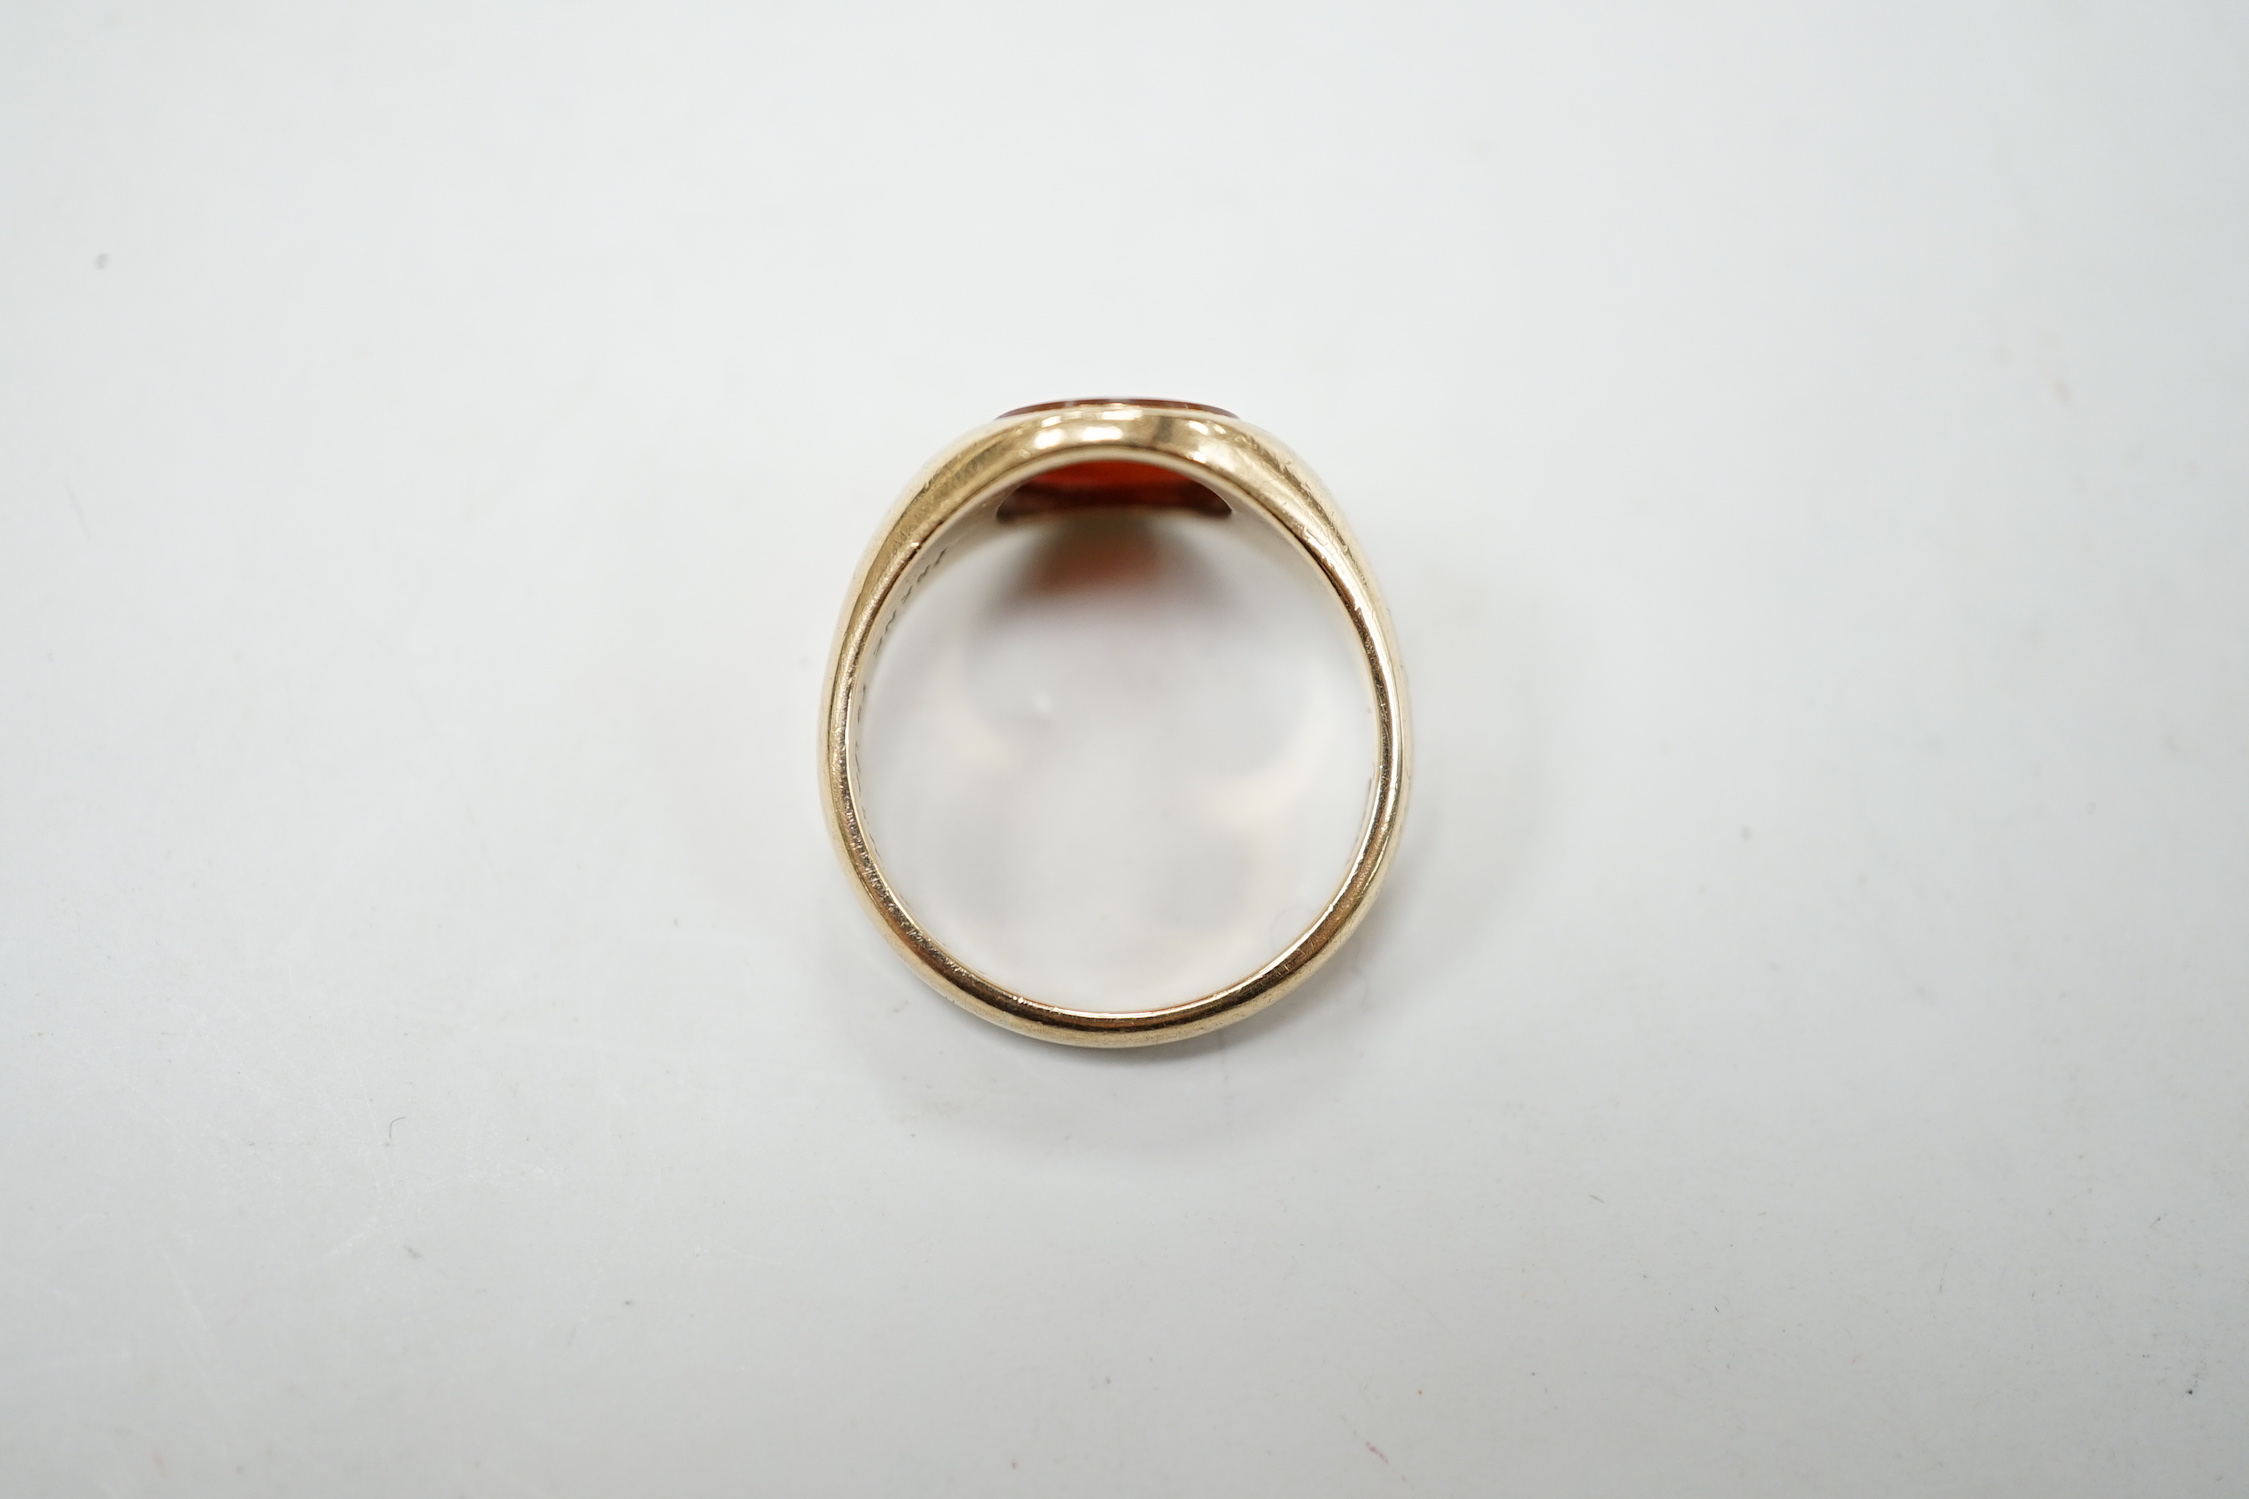 A 1930's 9ct gold and carnelian set oval signet ring, size Q, gross weight 5.7 grams.